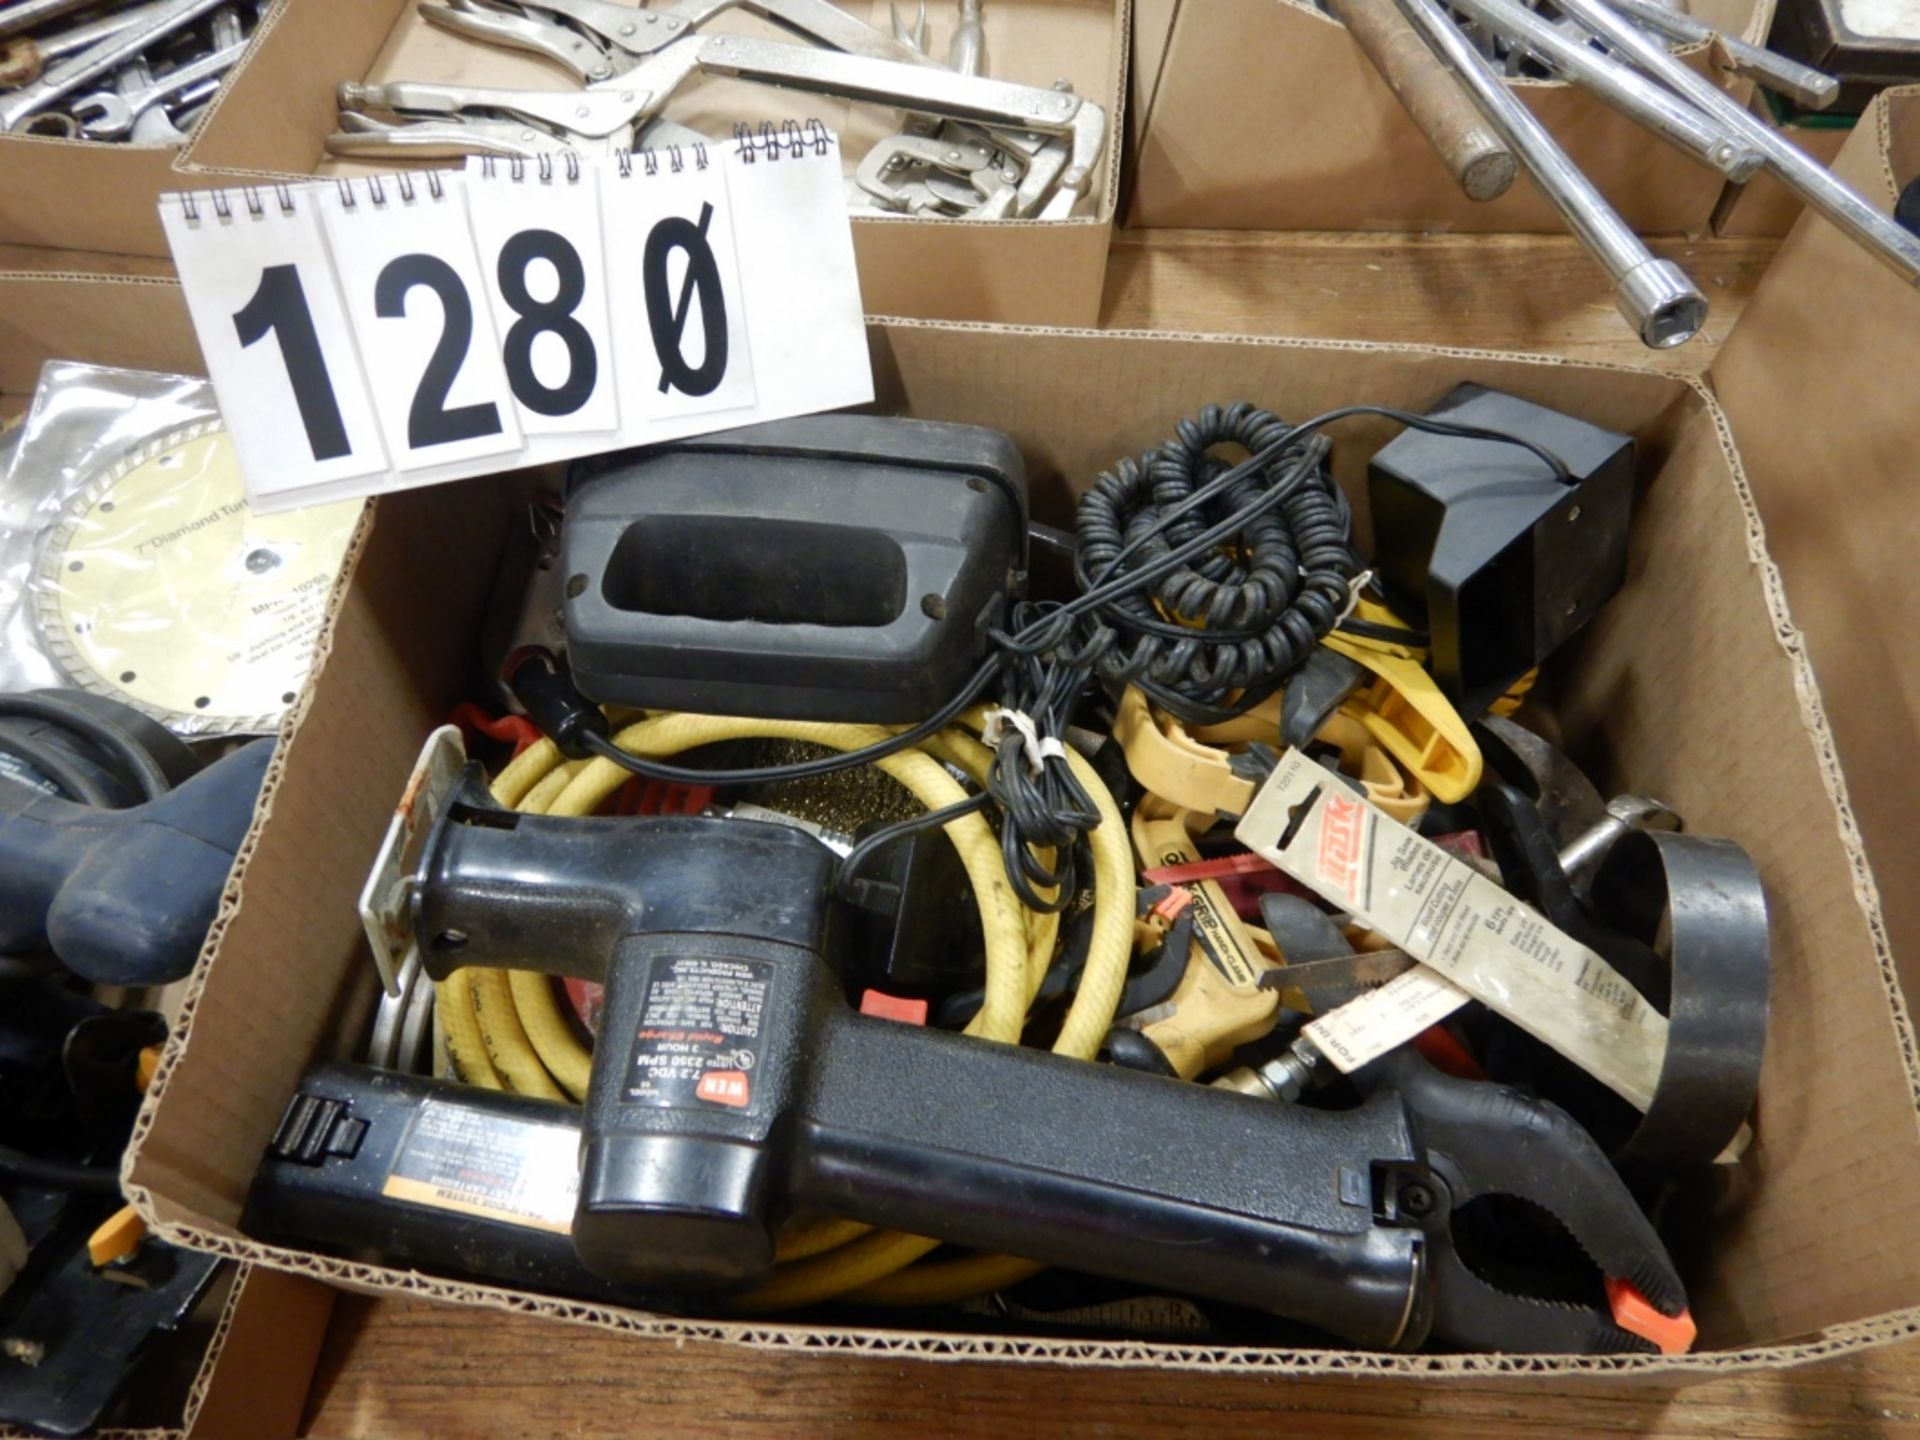 ASSORTED HAND TOOLS, CHALK LINE, TAPE MEASURES, BAR CLAMPS, HAMMER ETC